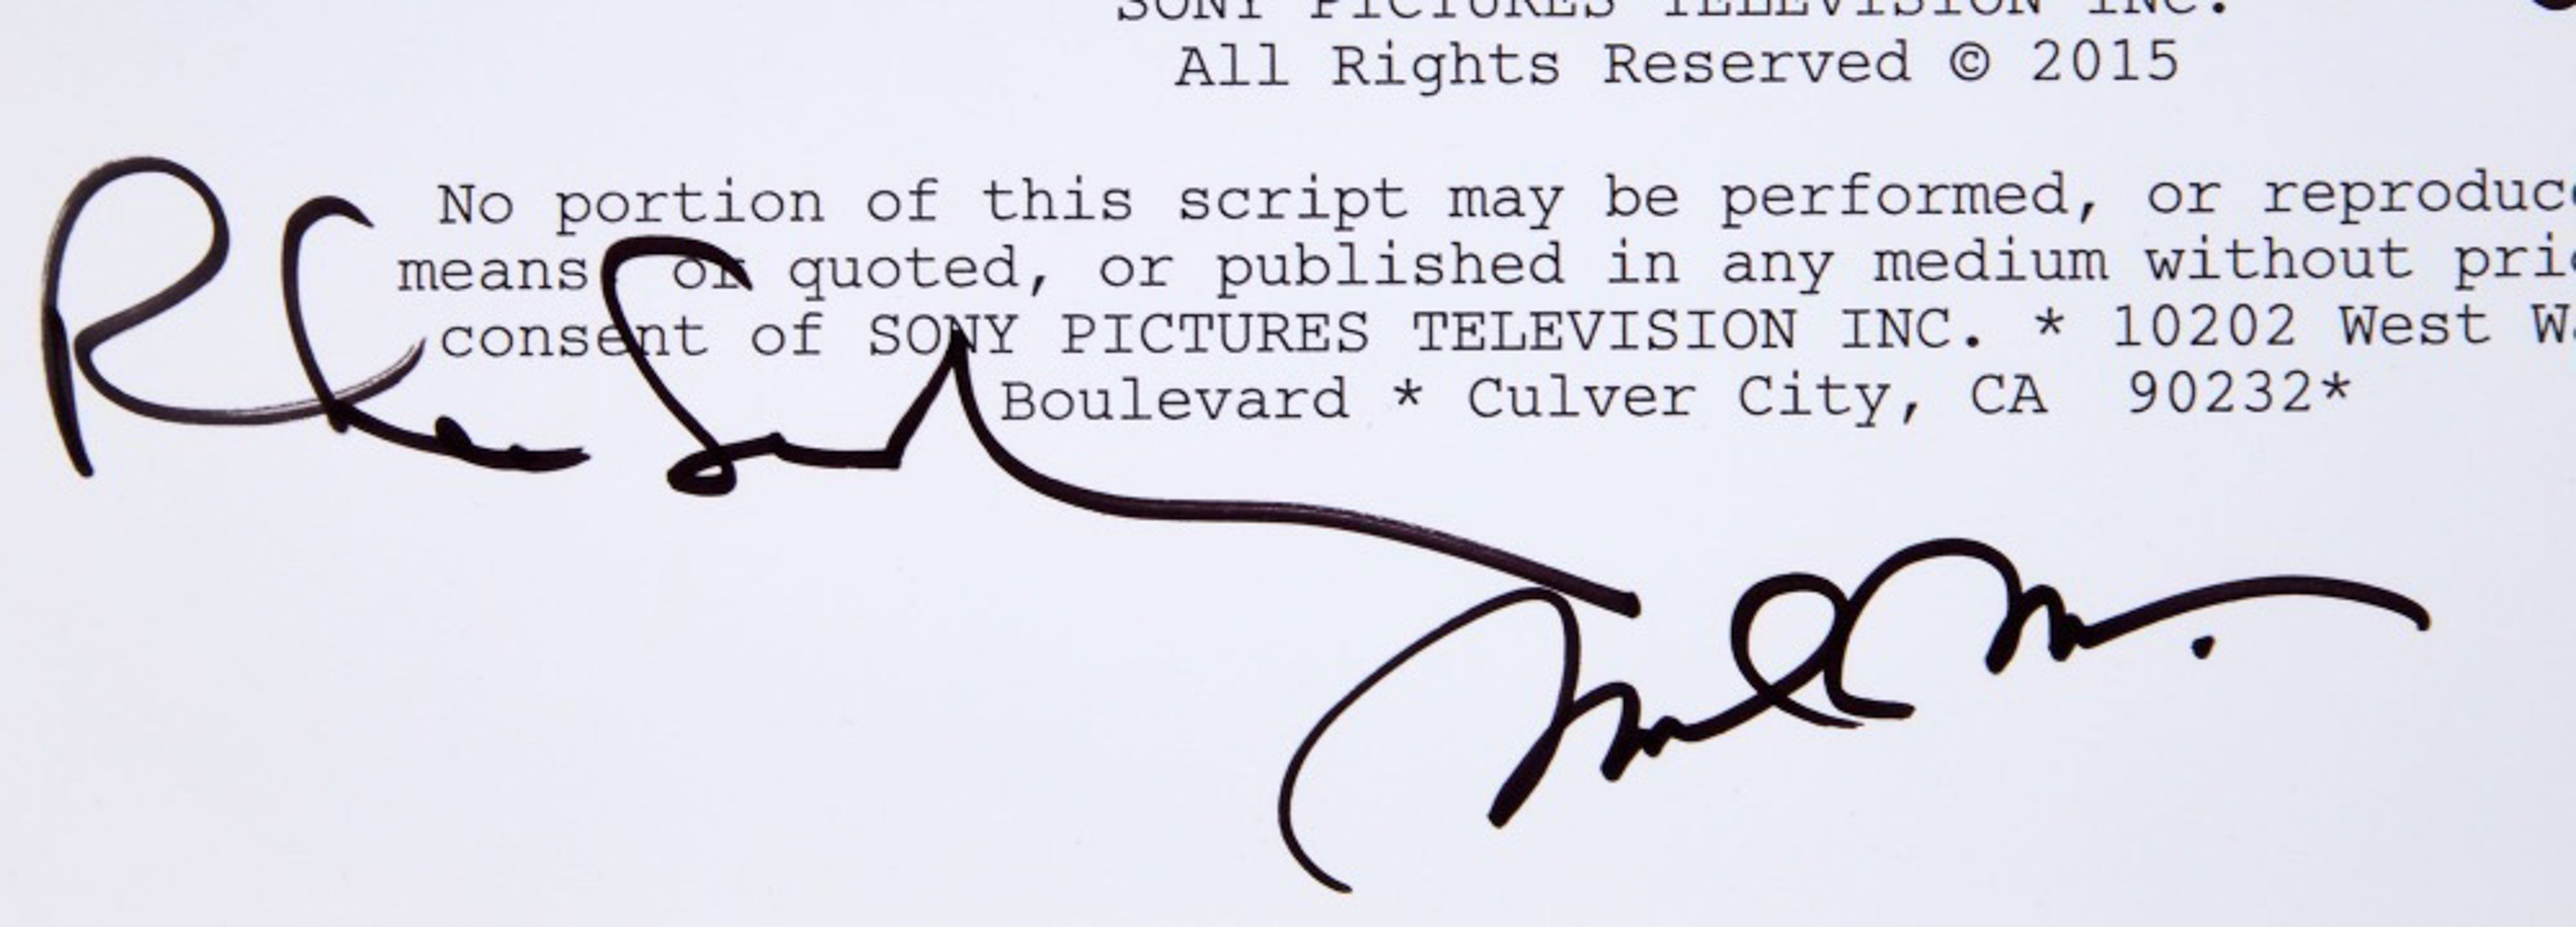 BETTER CALL SAUL | CAST AND CREATOR-SIGNED "SWITCH" SCRIPT COVER - Image 5 of 5